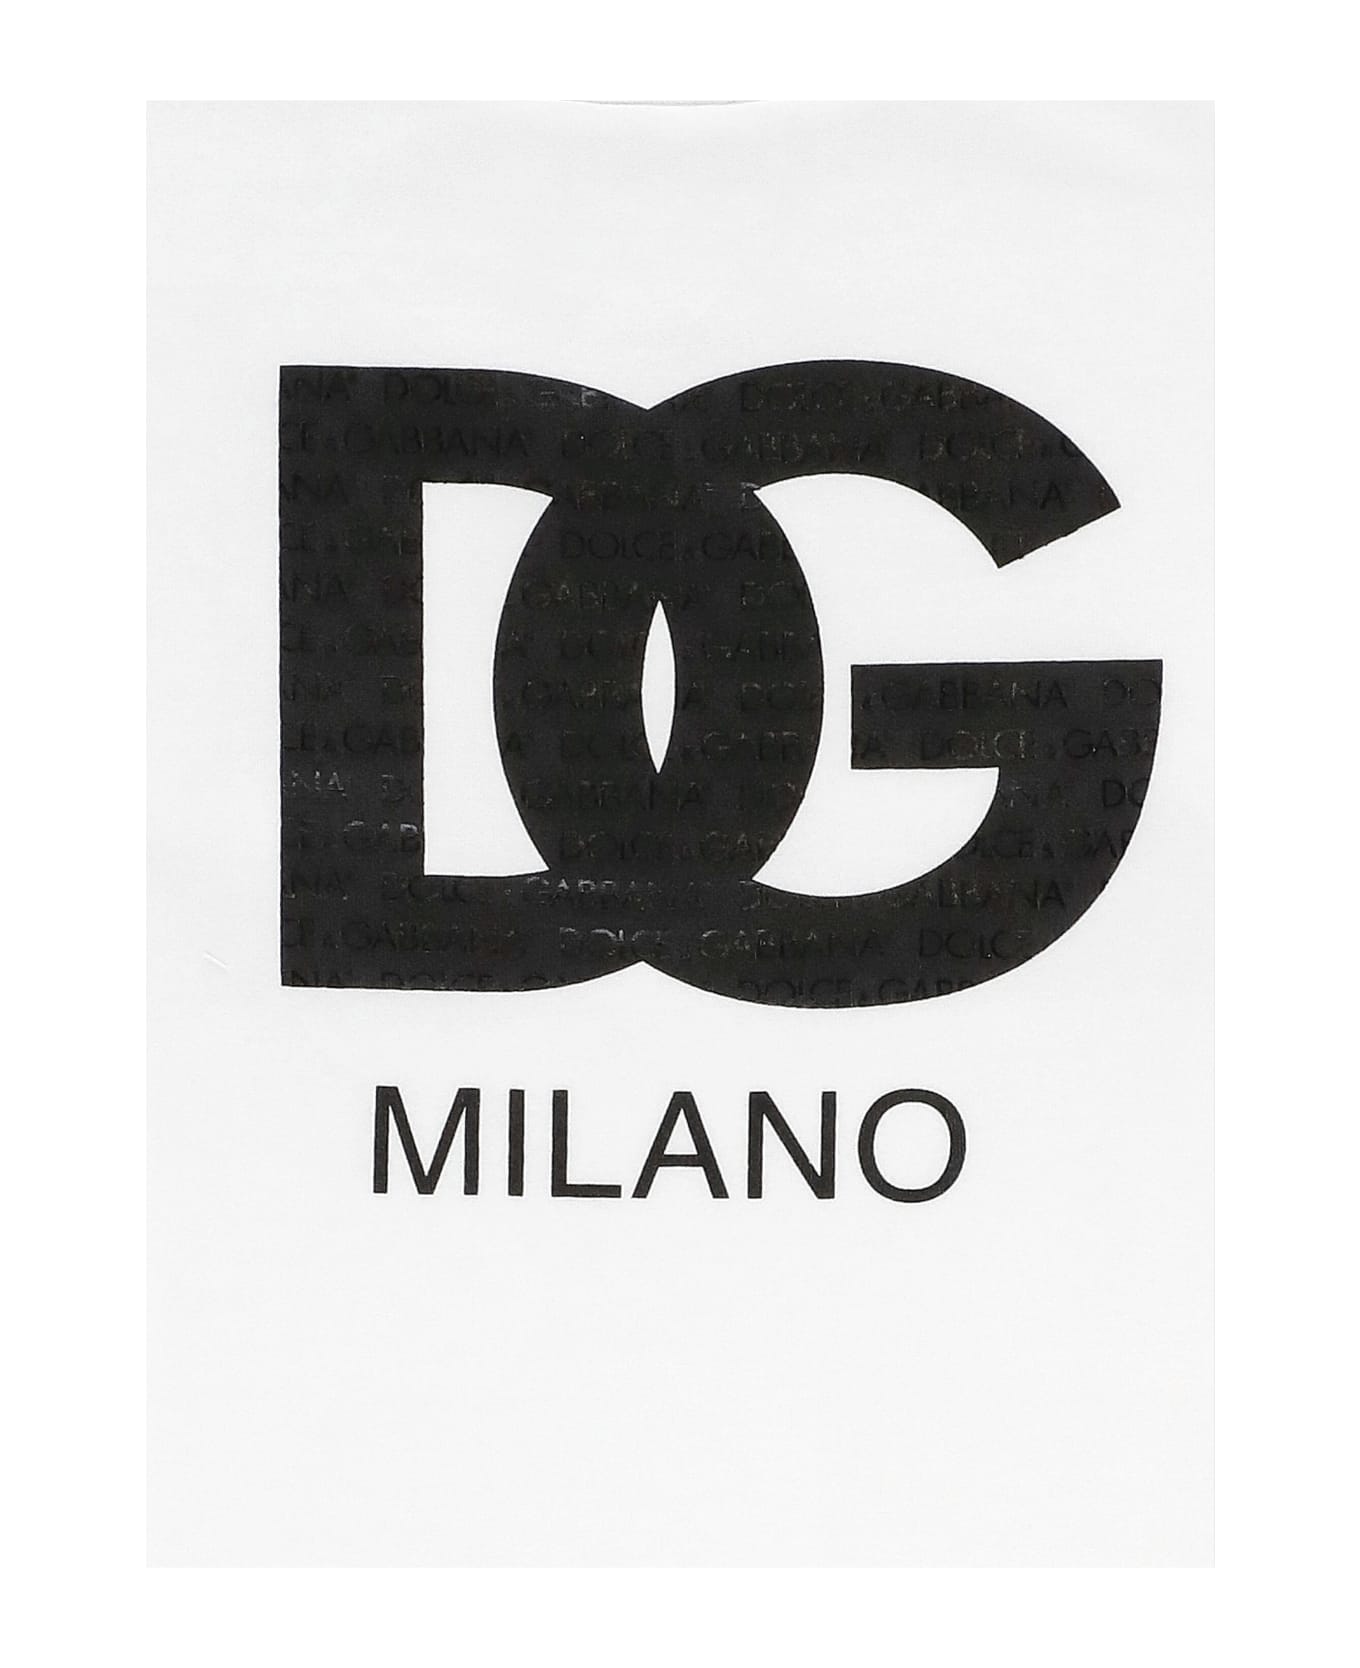 Dolce & Gabbana T-shirt With Logo - White Tシャツ＆ポロシャツ